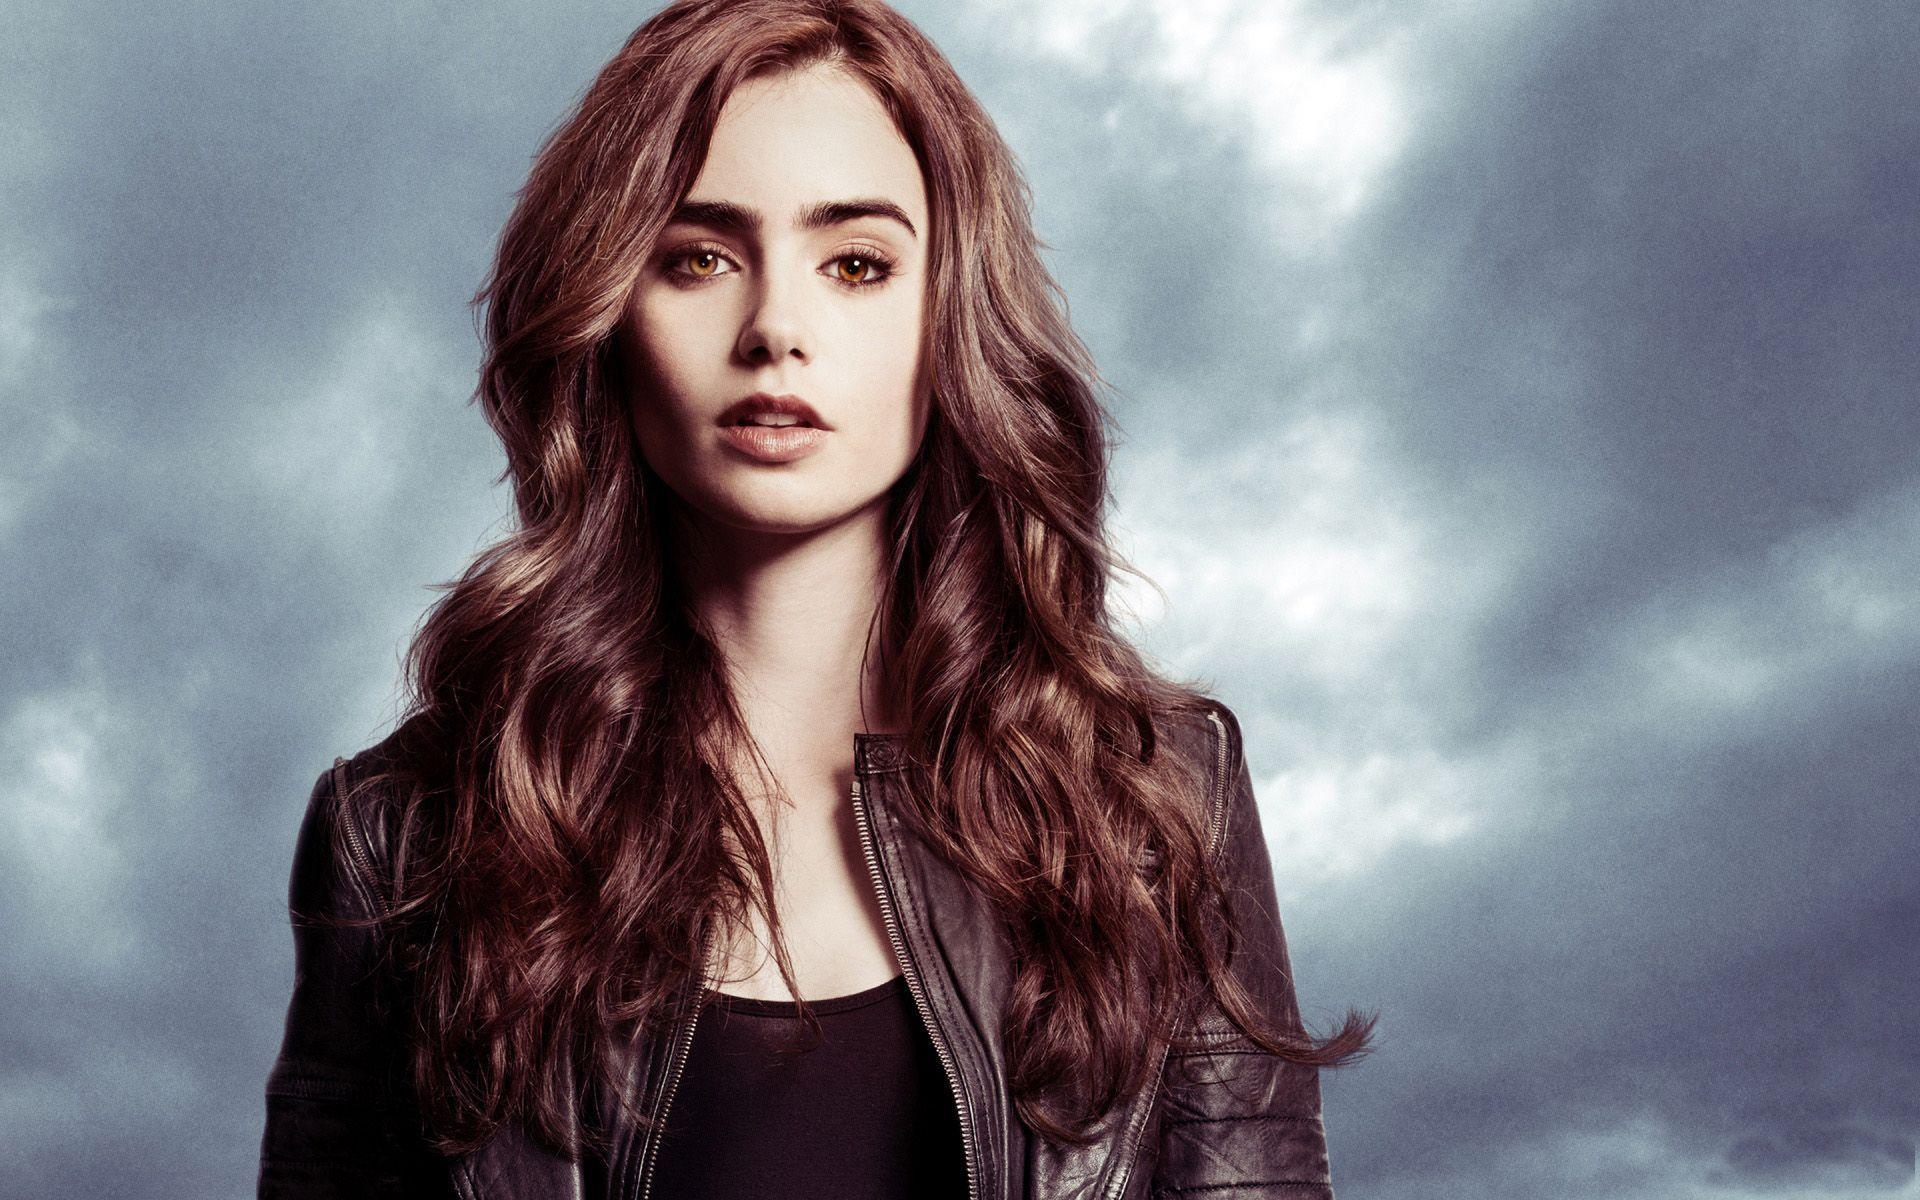 Lily Collins In The Mortal Instruments City Of Bones / Wallpaper as